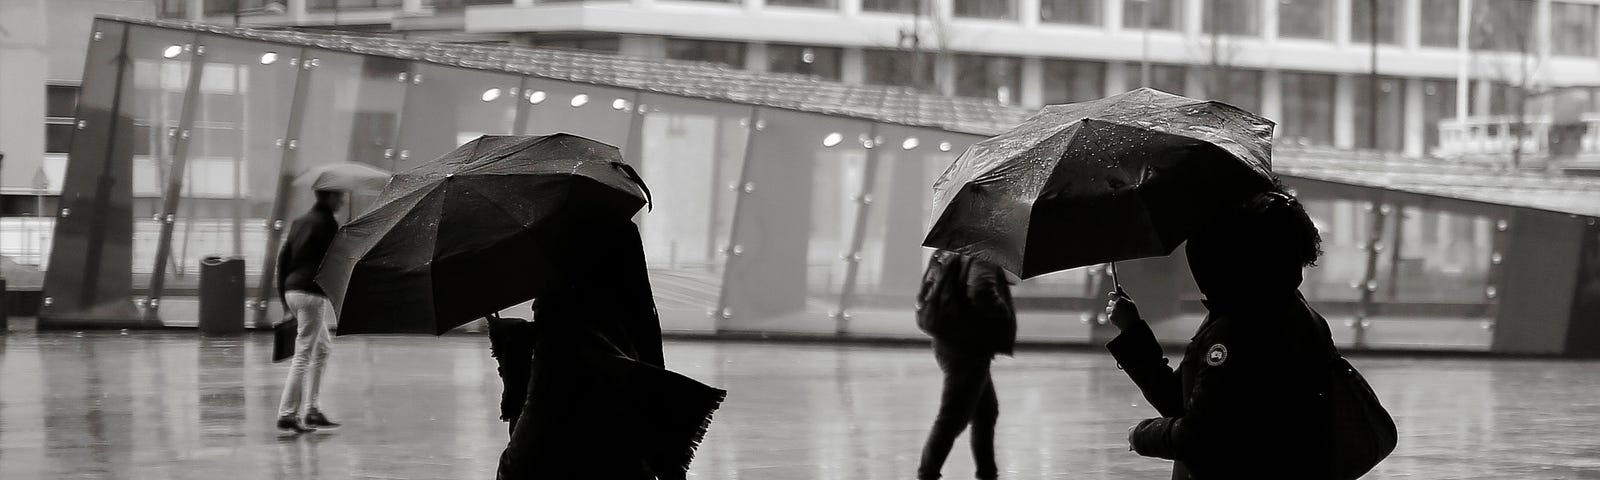 black and white image of people under umbrellas in a rainstorm